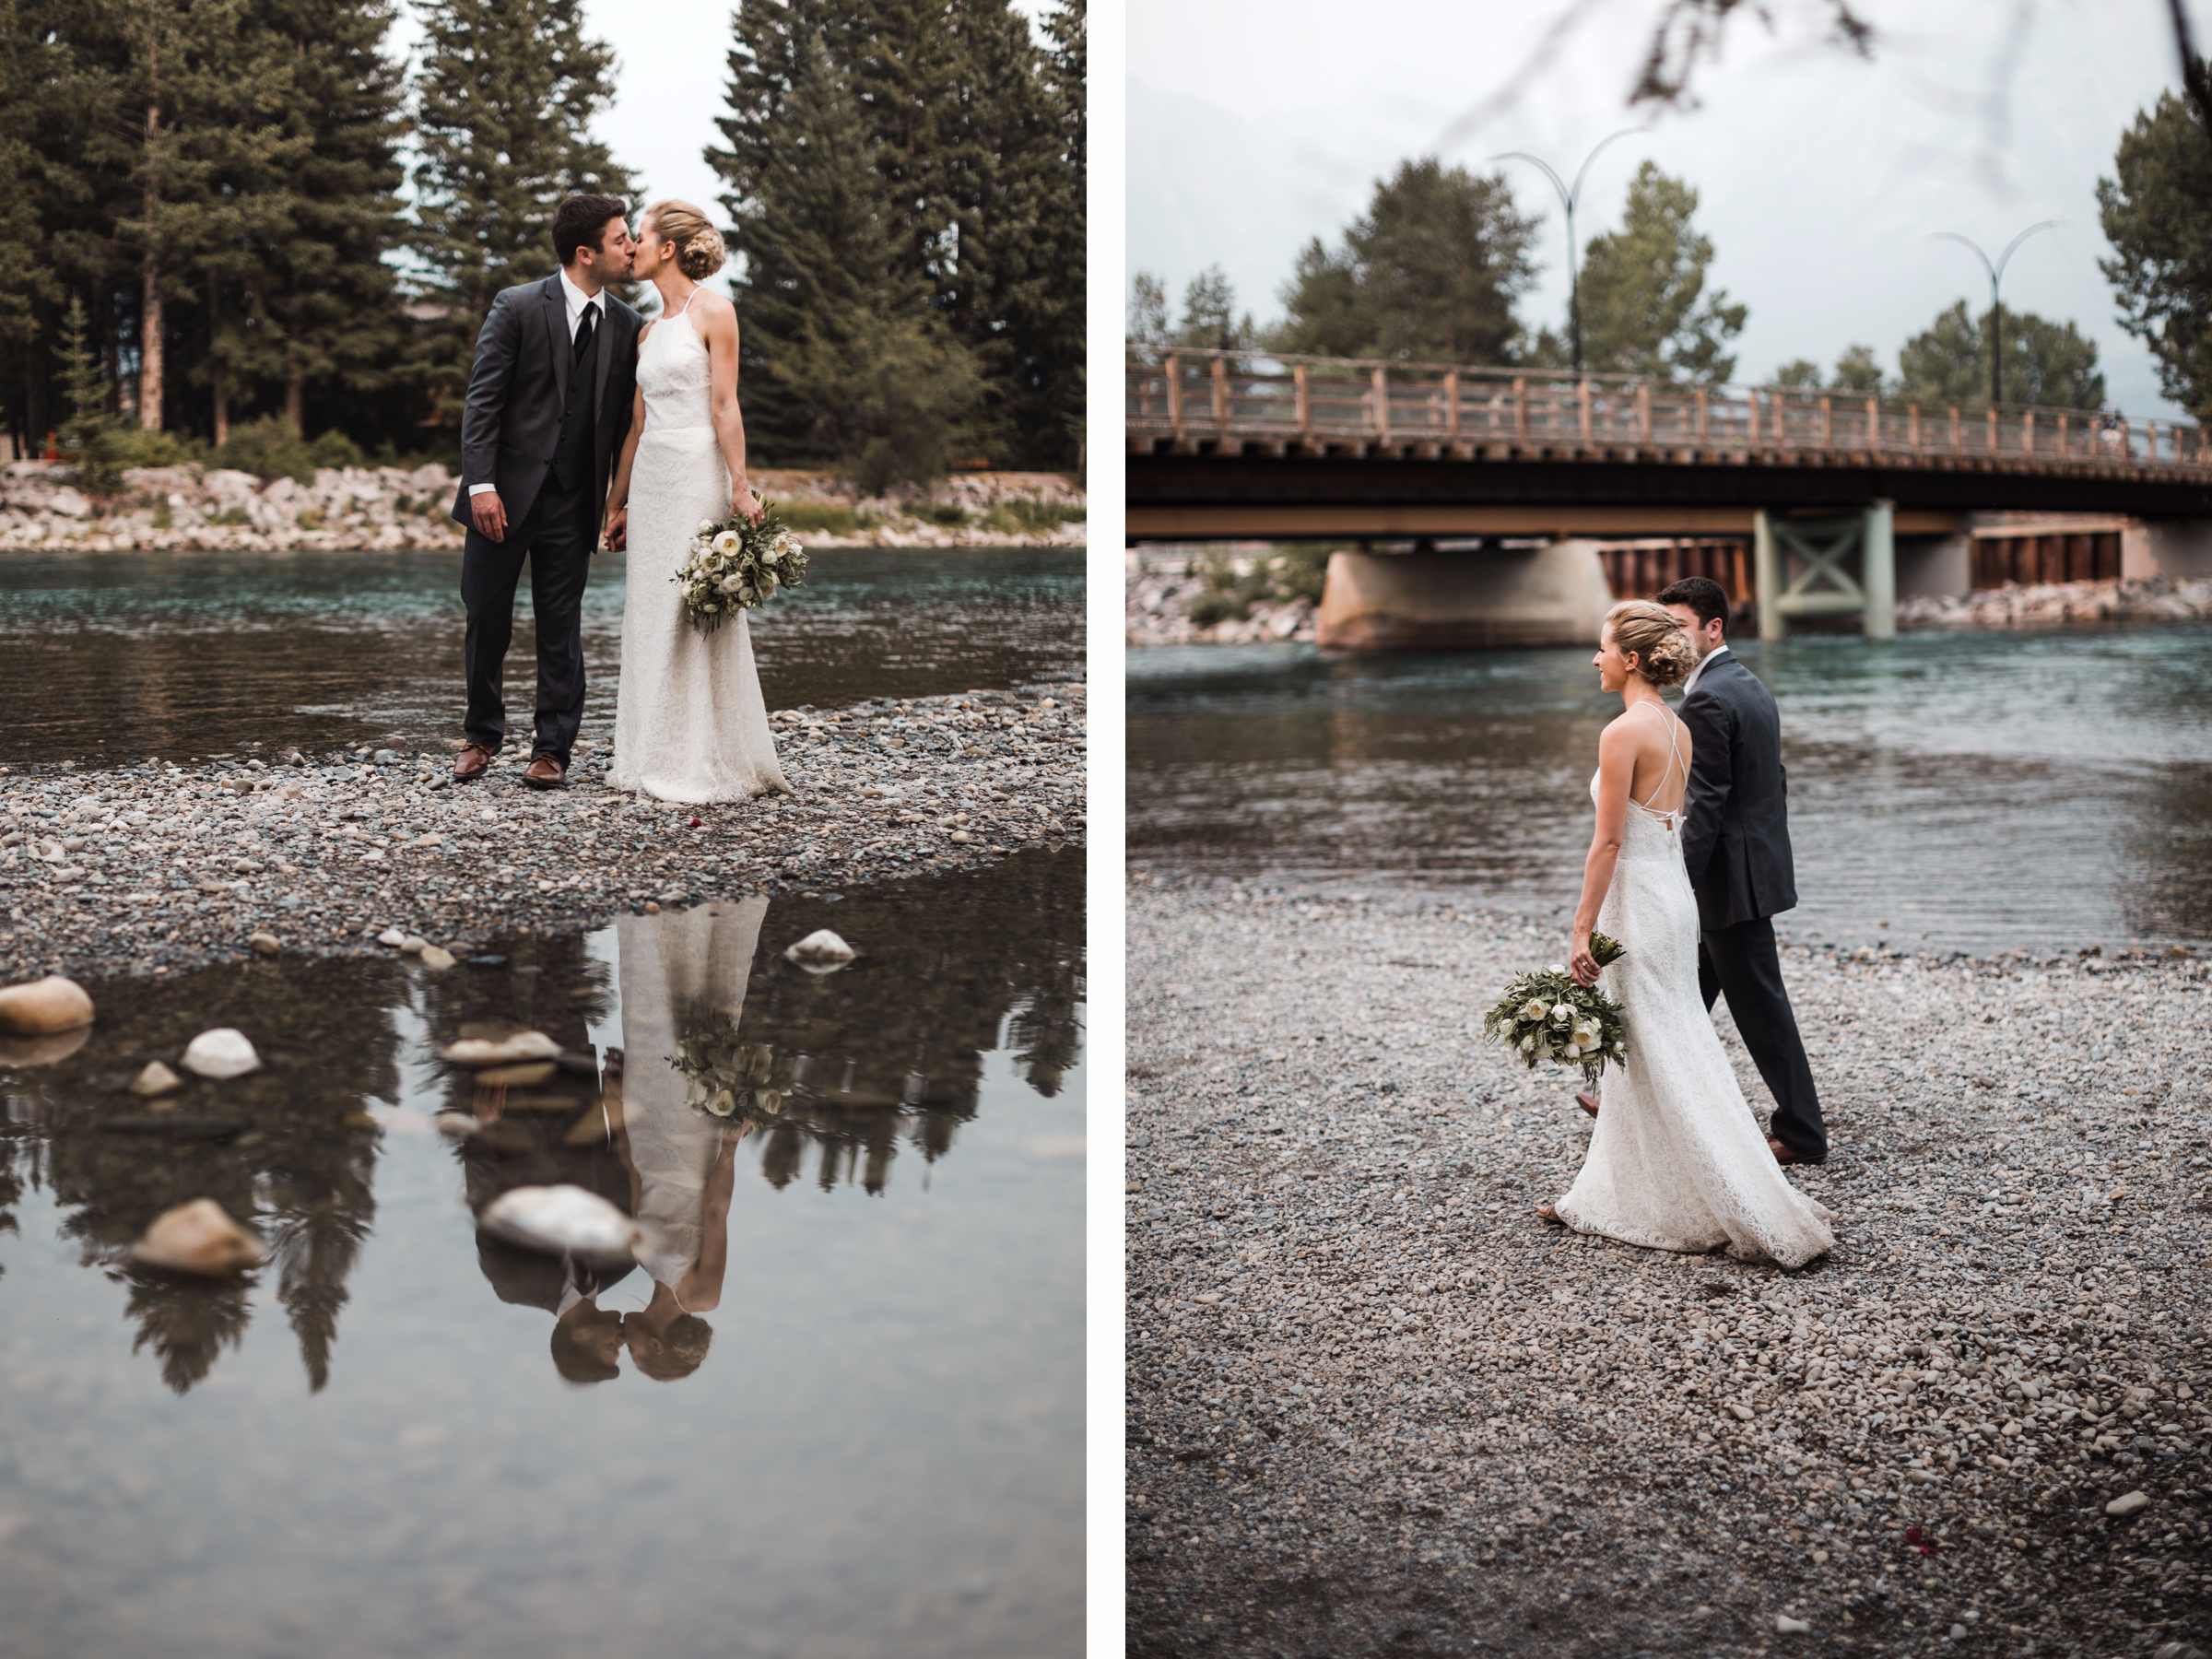 Calgary wedding photographer at Canmore and Banff destination elopement wedding in rocky mountains, Alberta, Canada - Photo 35